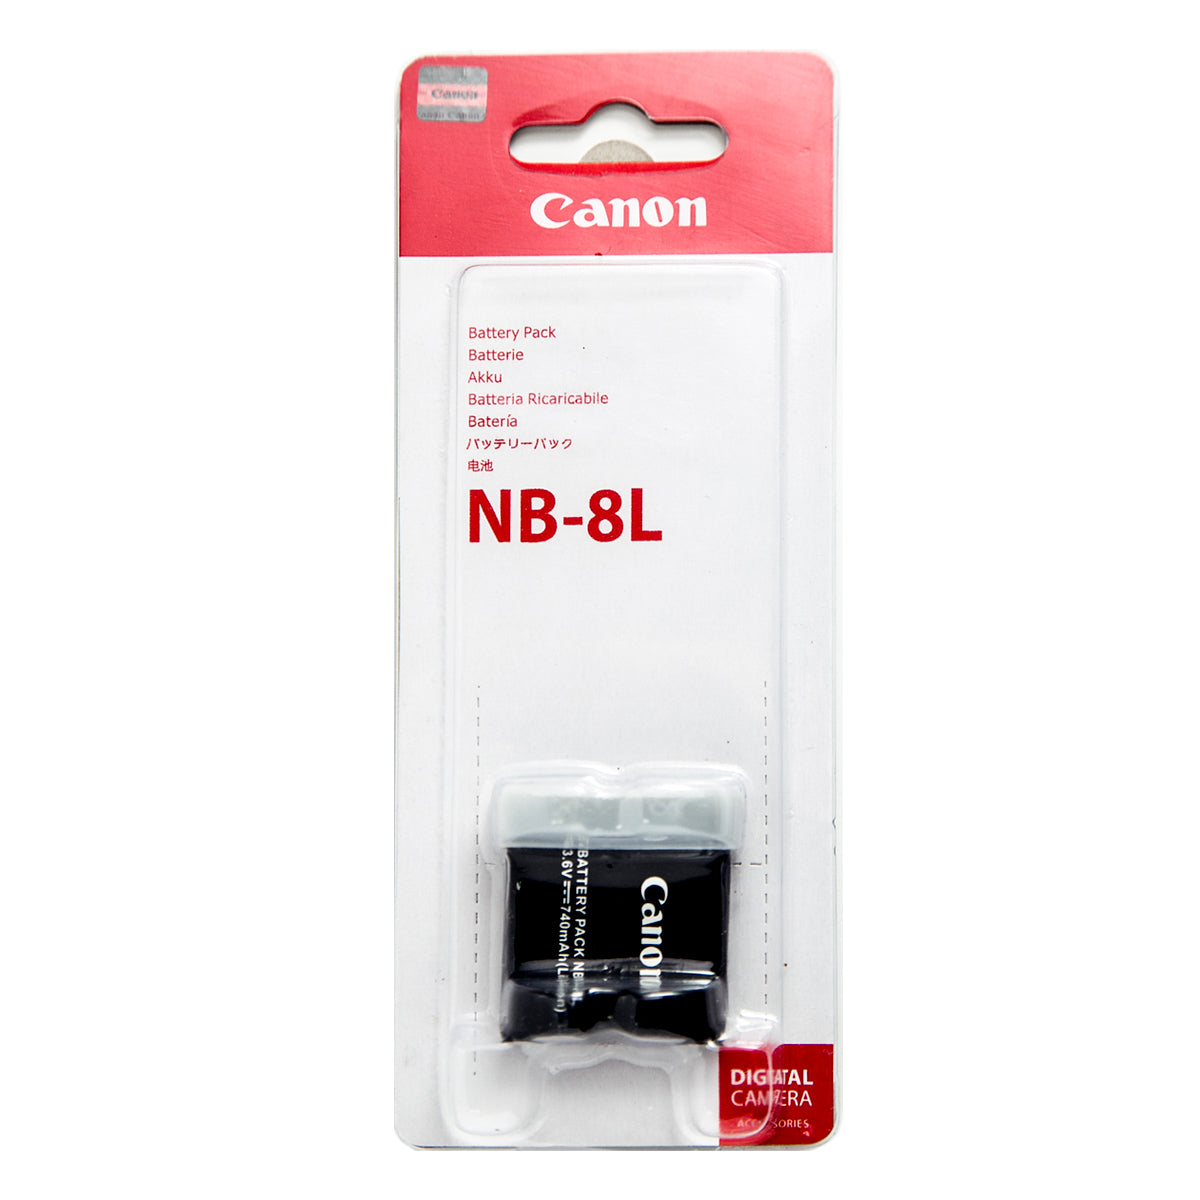 Pxel Canon NB-8L Replacement Lithium-Ion Rechargeable Battery 3.6V 740mAh for PowerShot A2200 A3100 A3000 Digital Cameras (Class A)